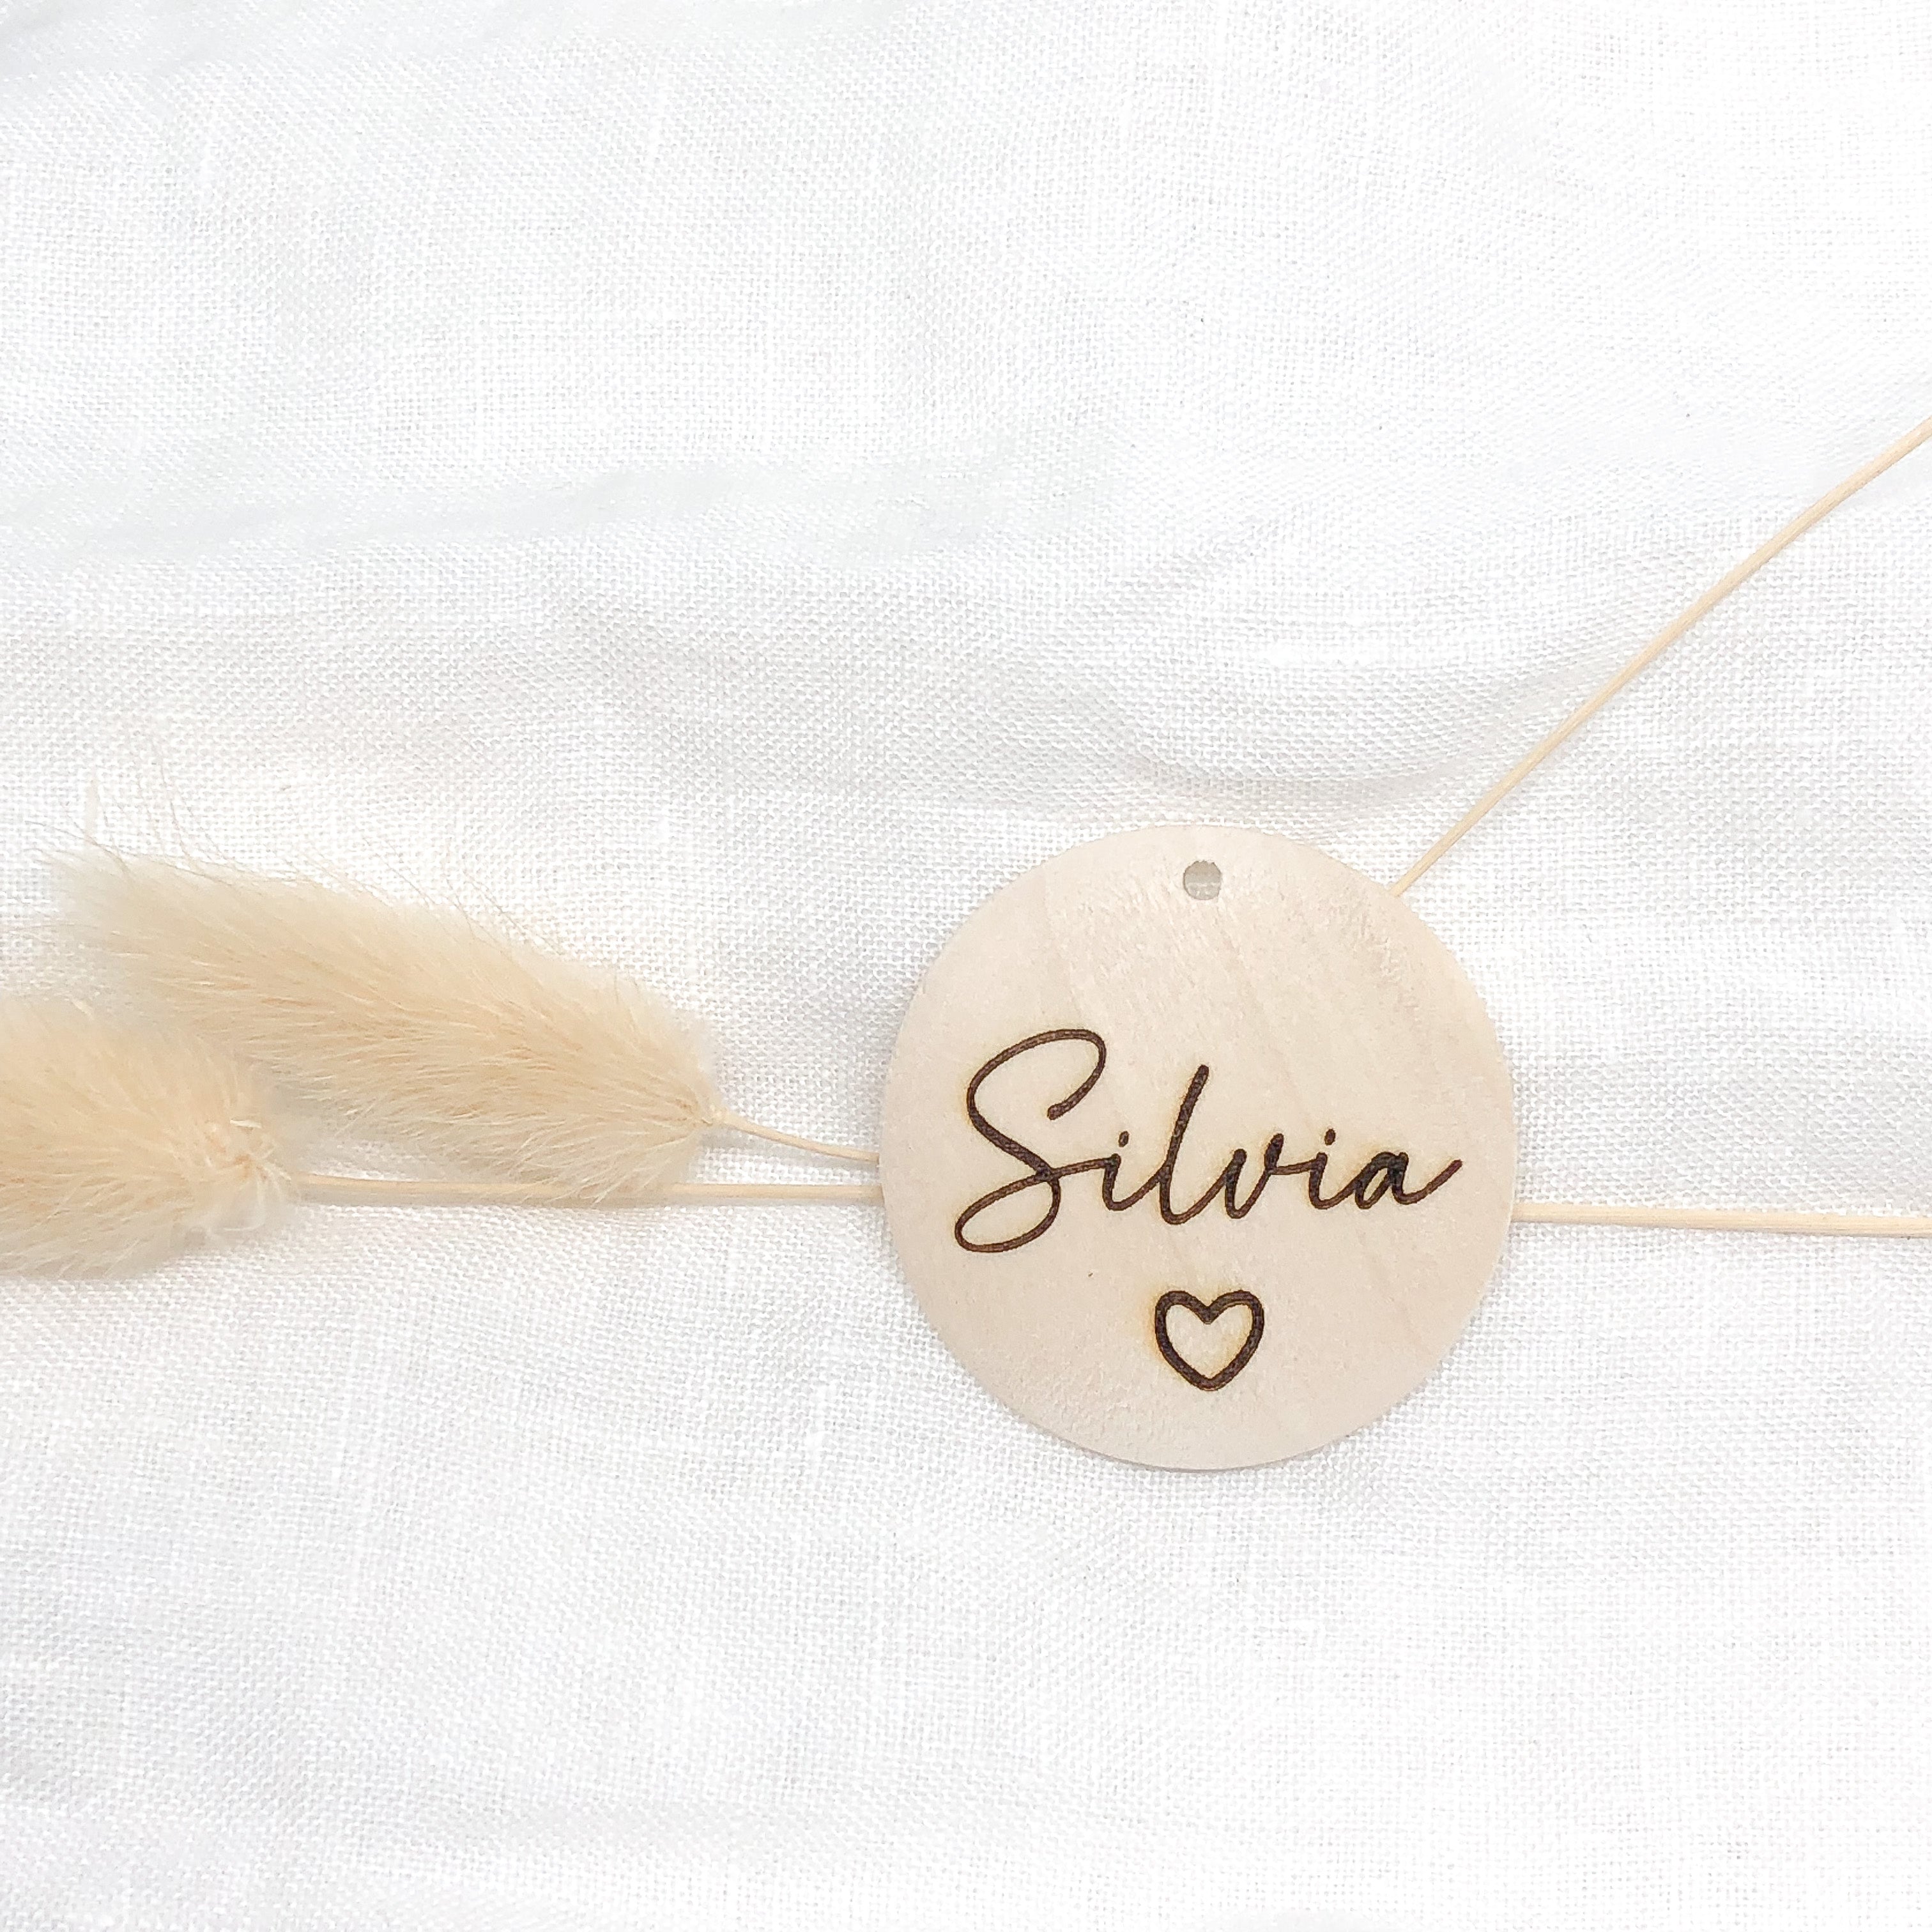 Pendant/place card personalized with name and heart